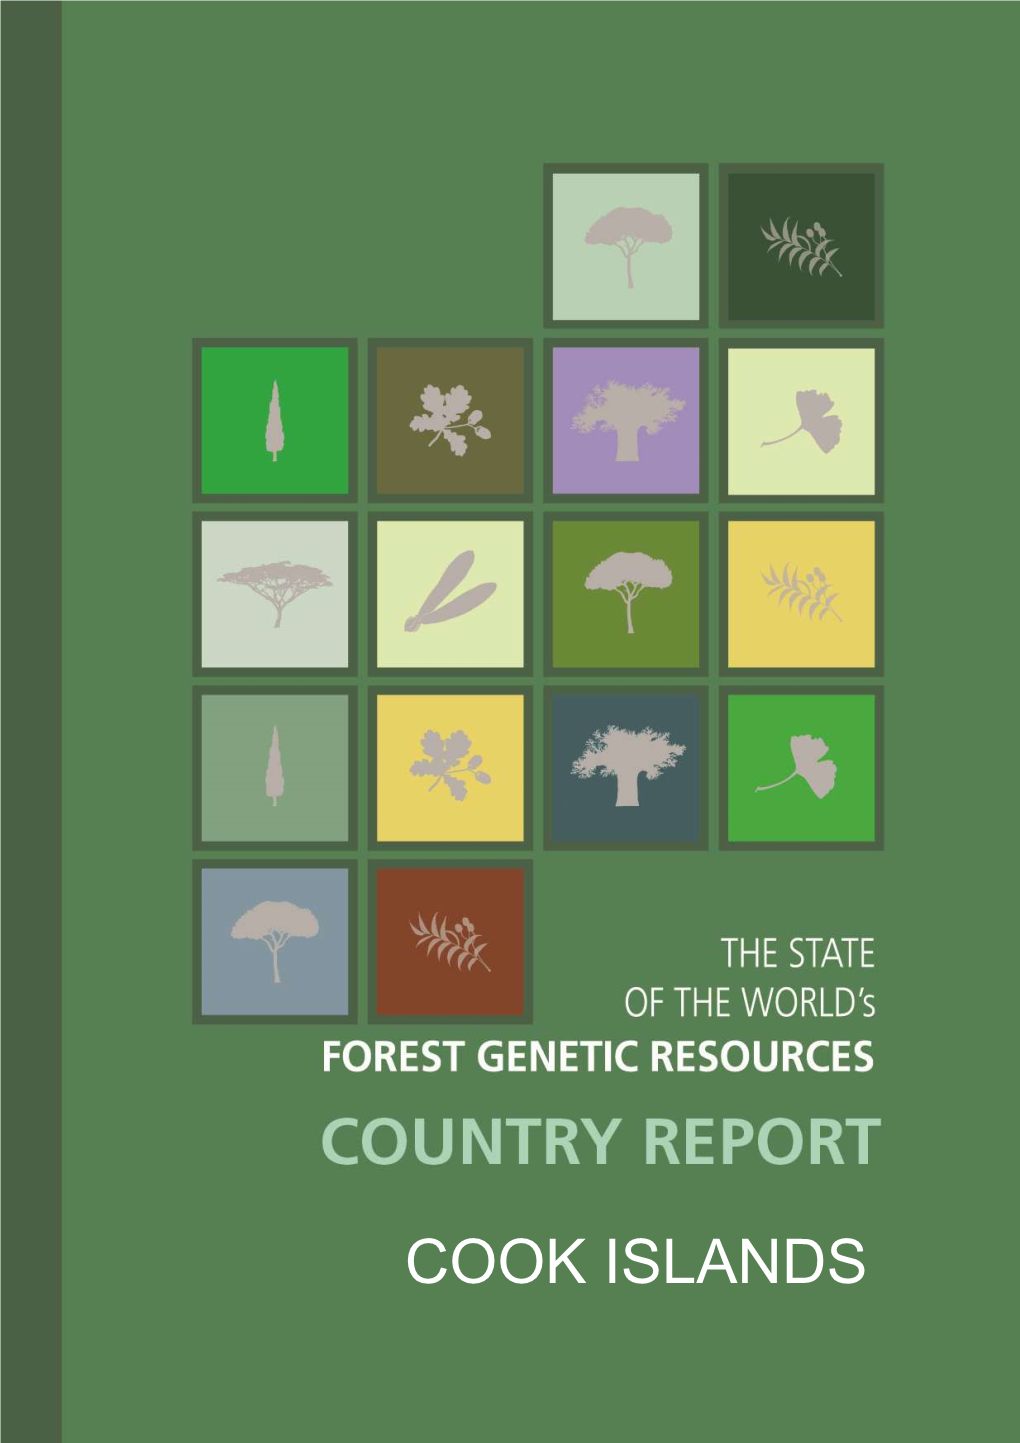 The State of the World's Forest Genetic Resources